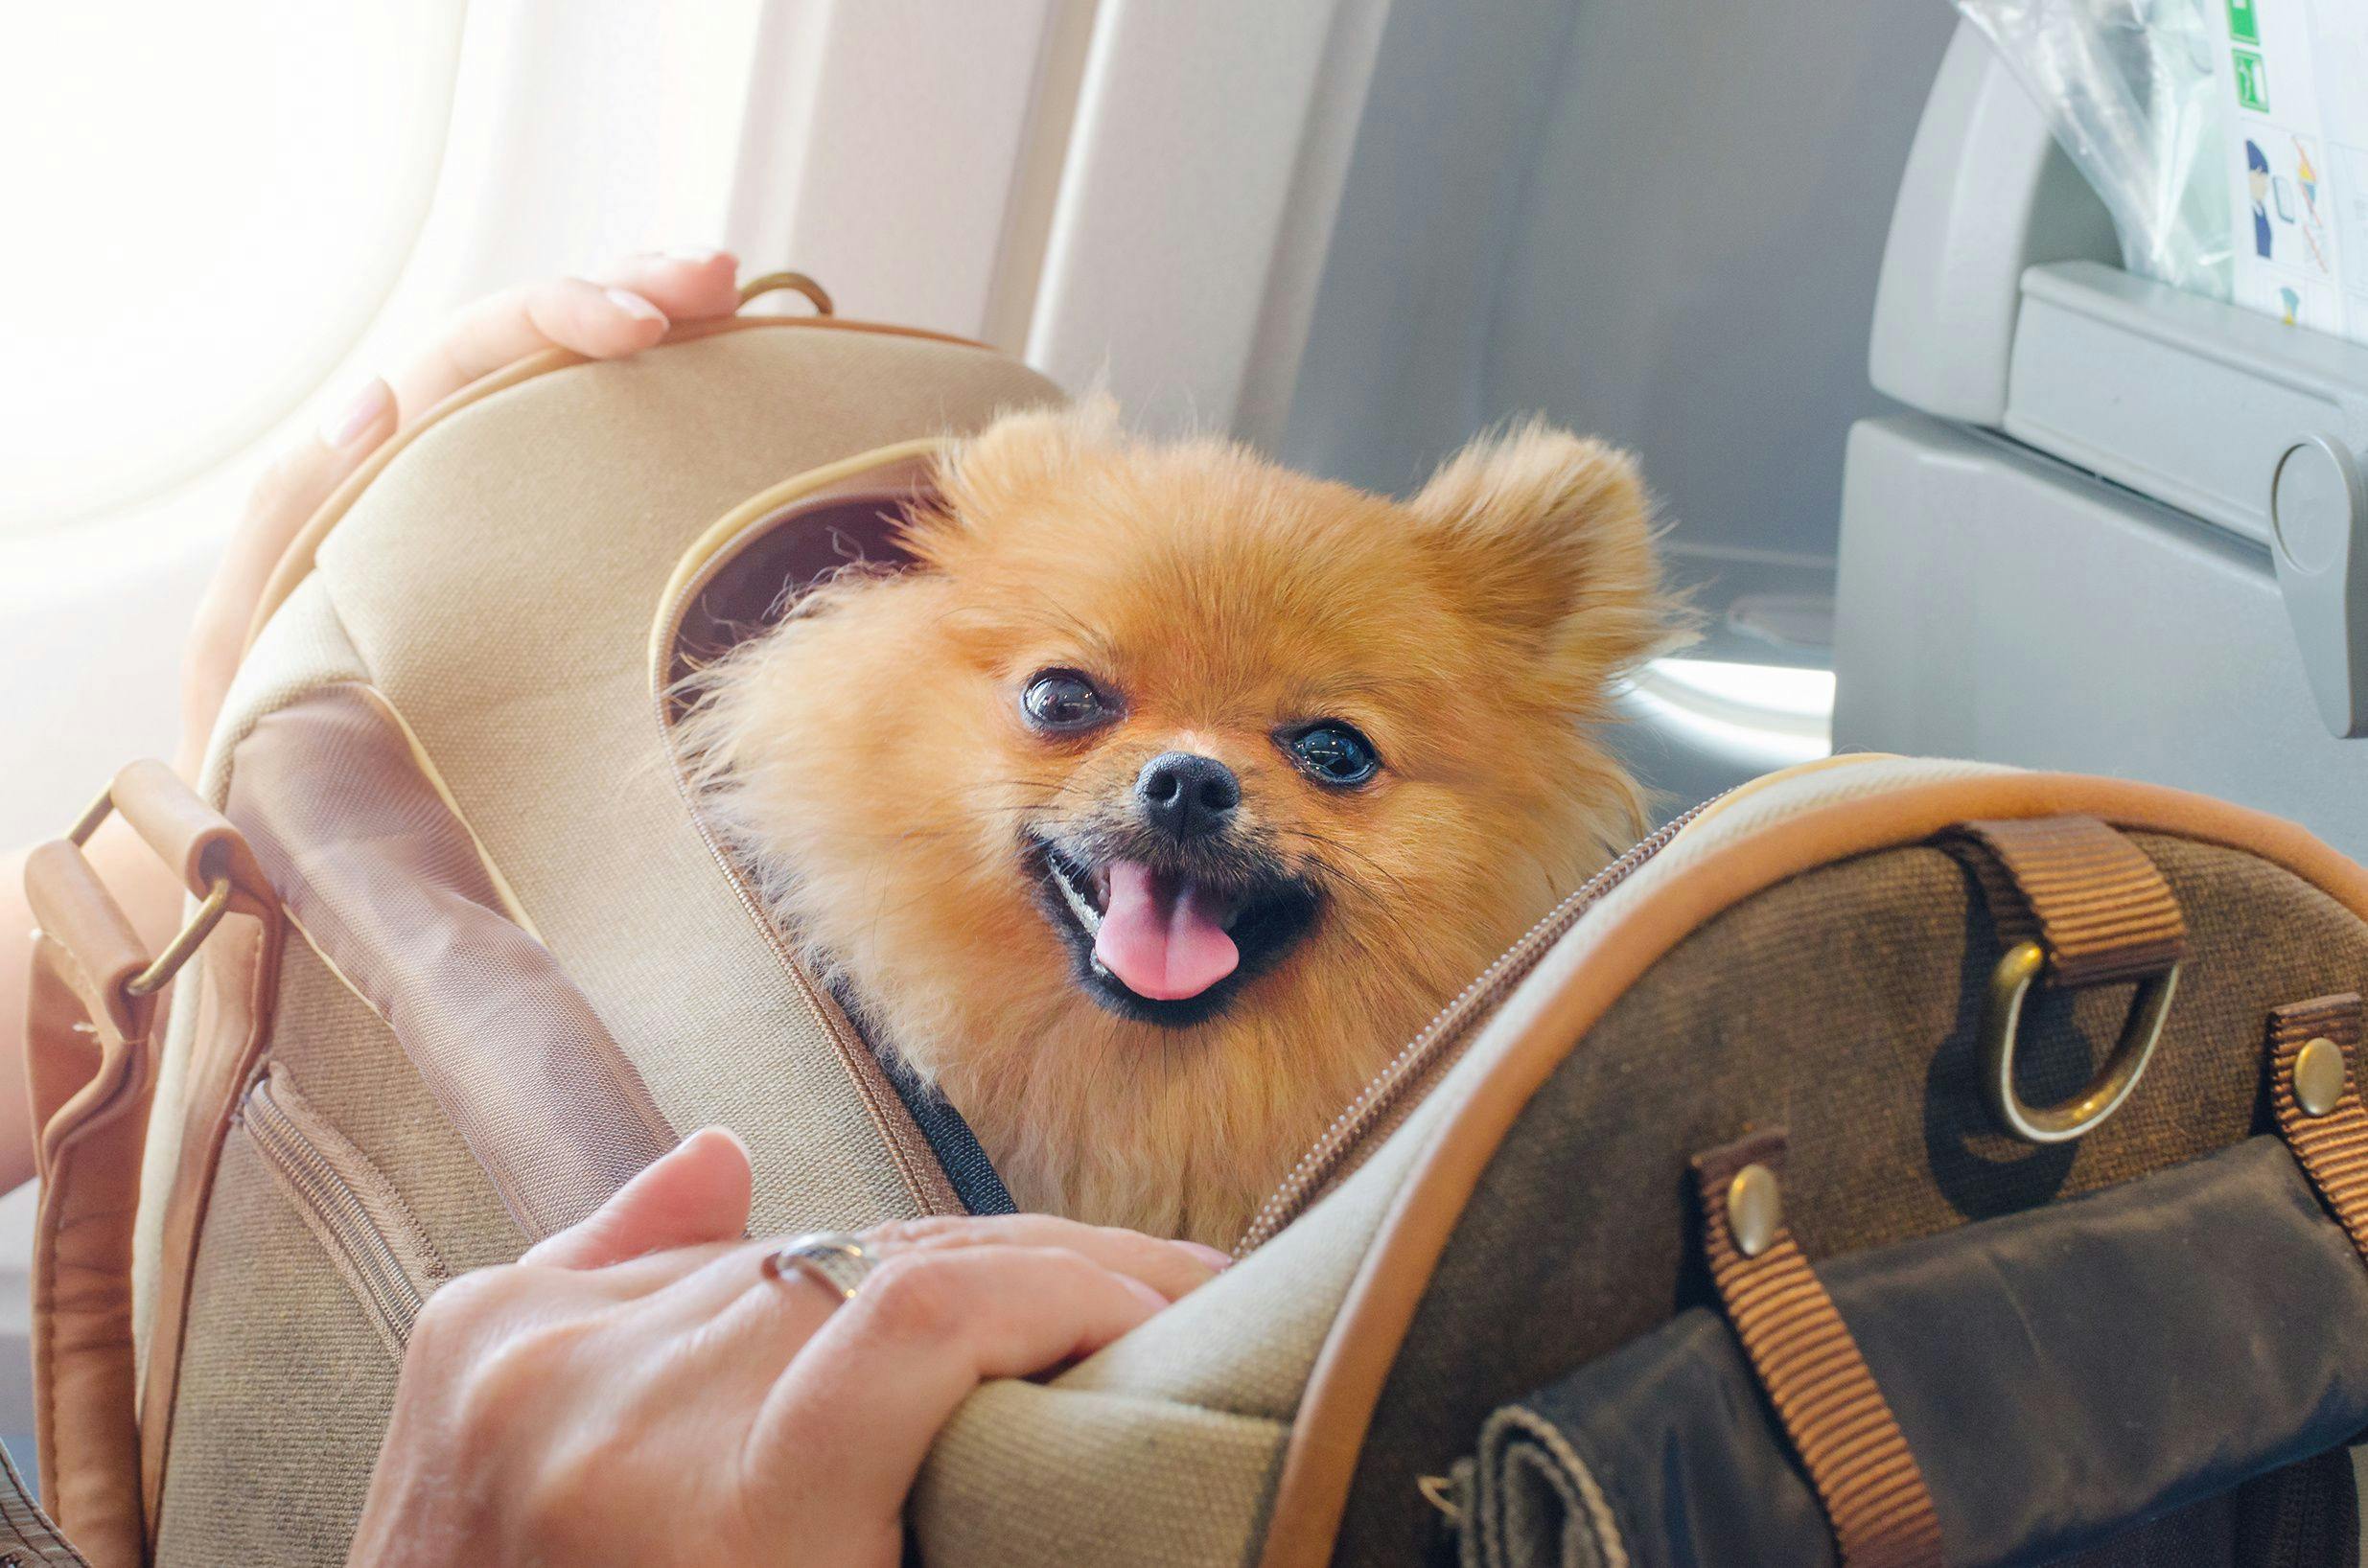 Fuzzy joins forces with JetBlue for traveling pet owners 